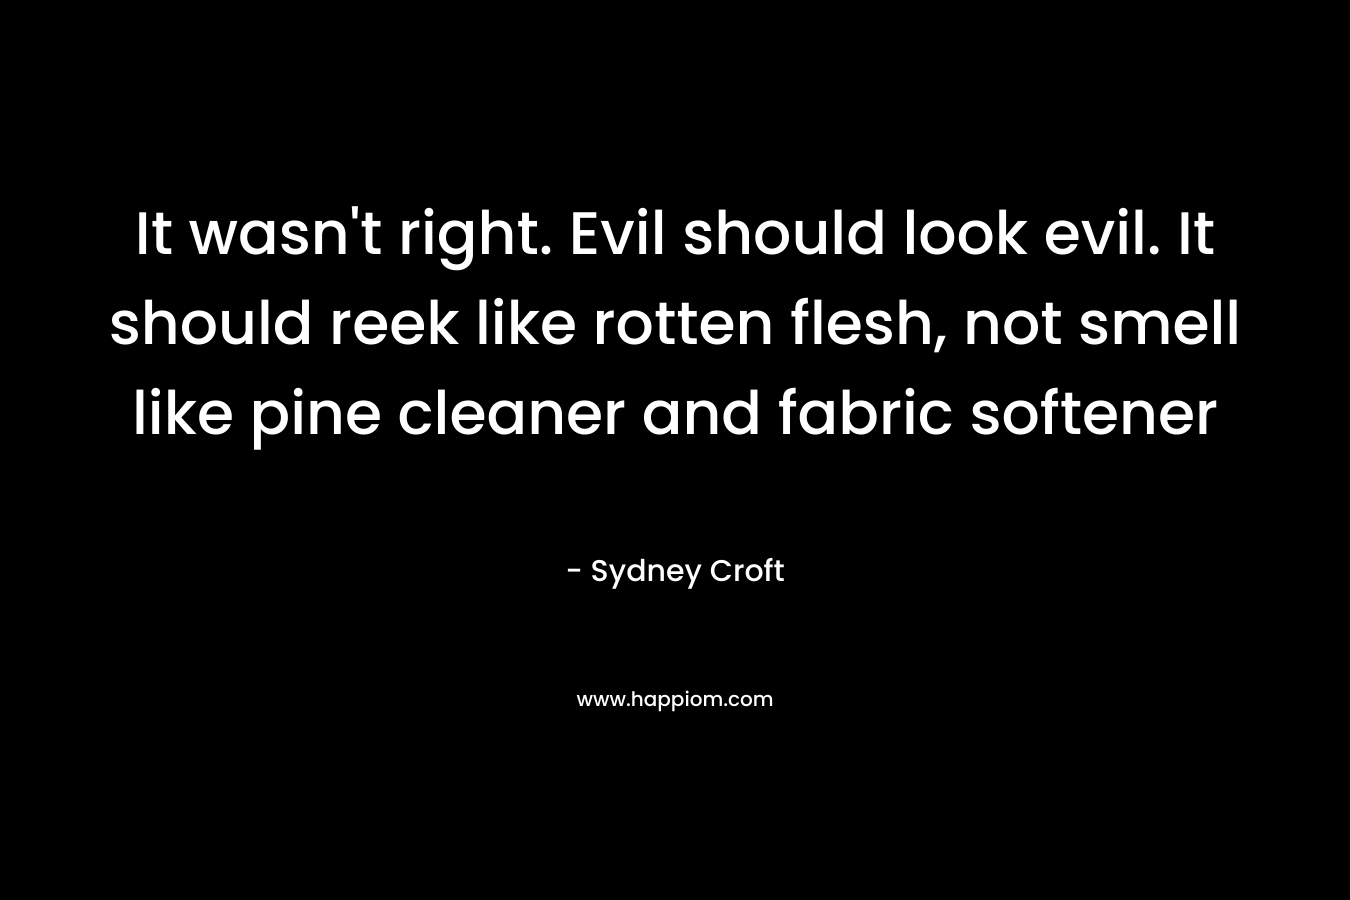 It wasn’t right. Evil should look evil. It should reek like rotten flesh, not smell like pine cleaner and fabric softener – Sydney Croft